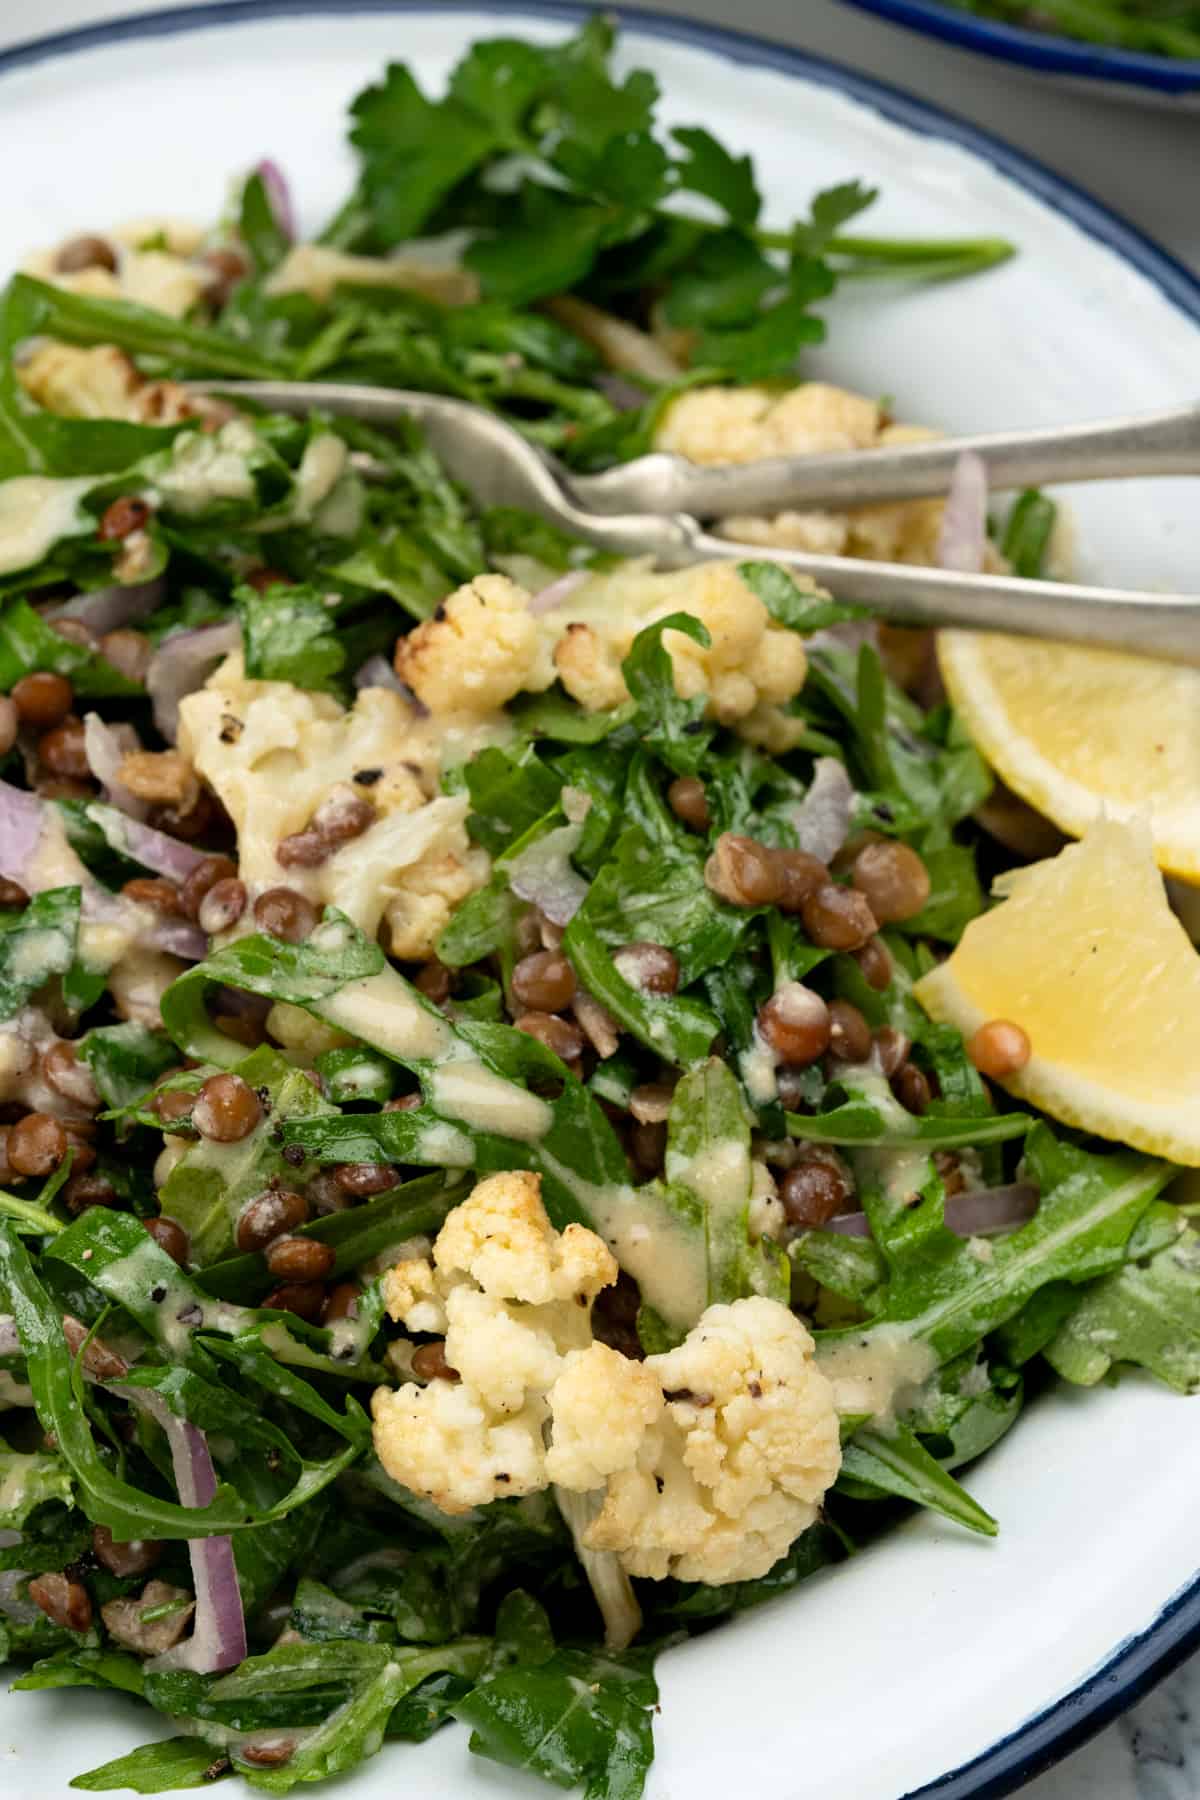 Roasted cauliflower salad with lentils, drizzled with tahini dressing